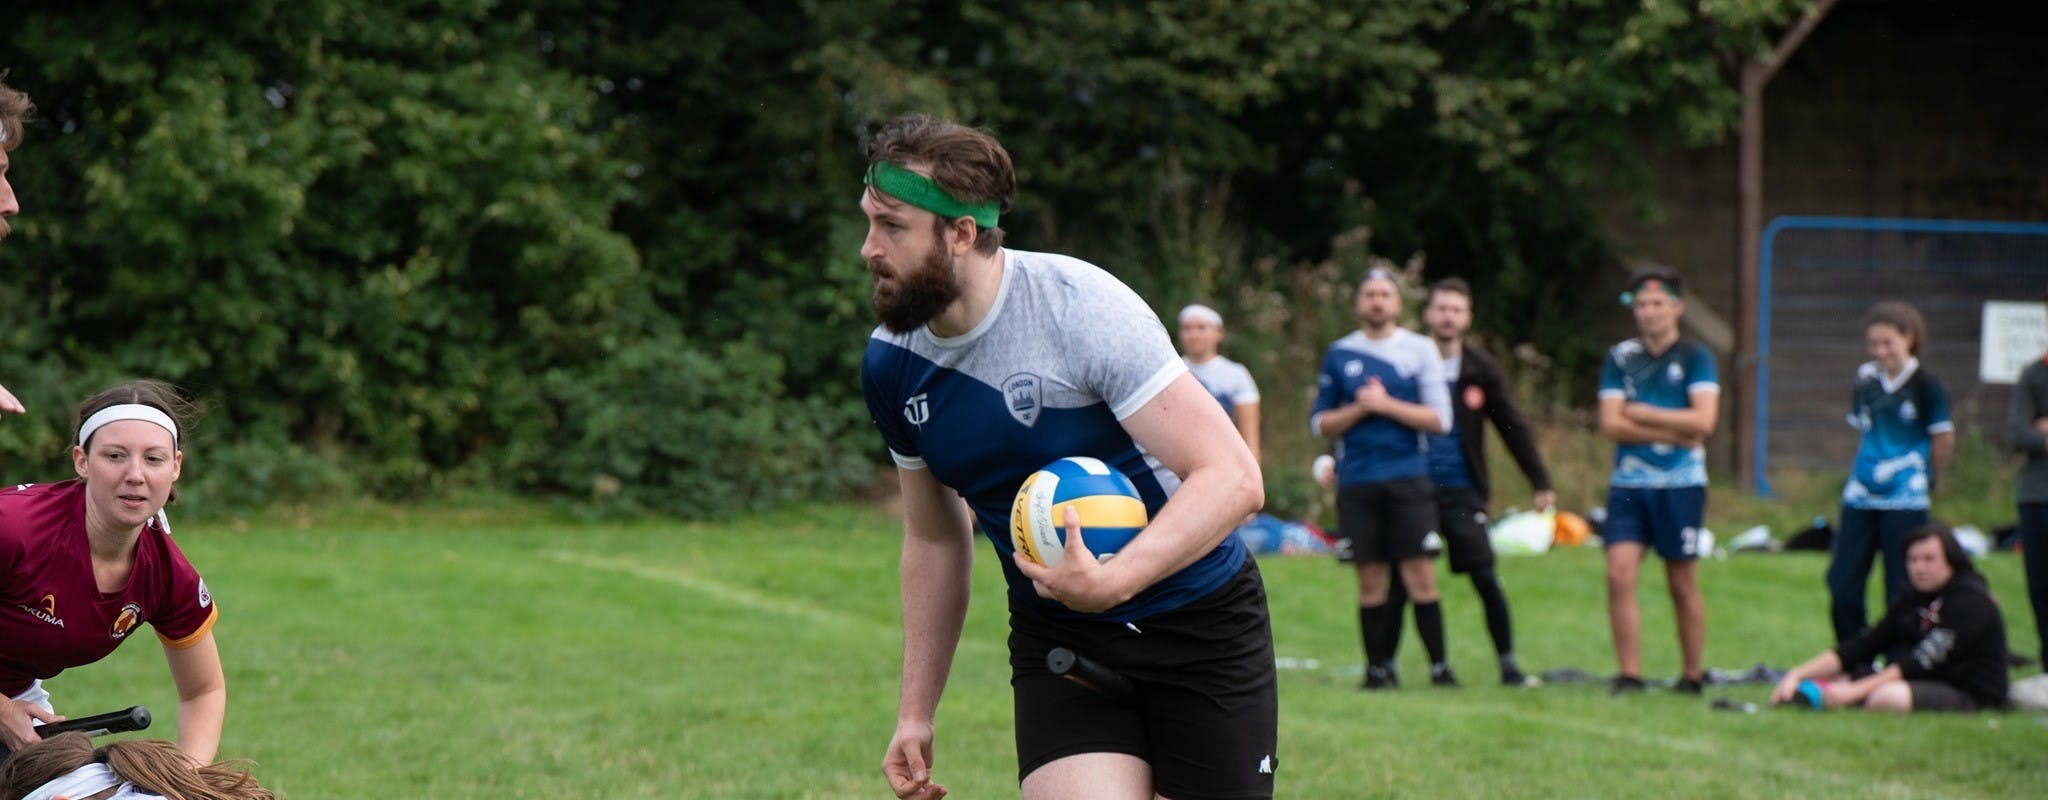 Dec Ramsay playing as keeper for London Quidditch Club, running with the quaffle